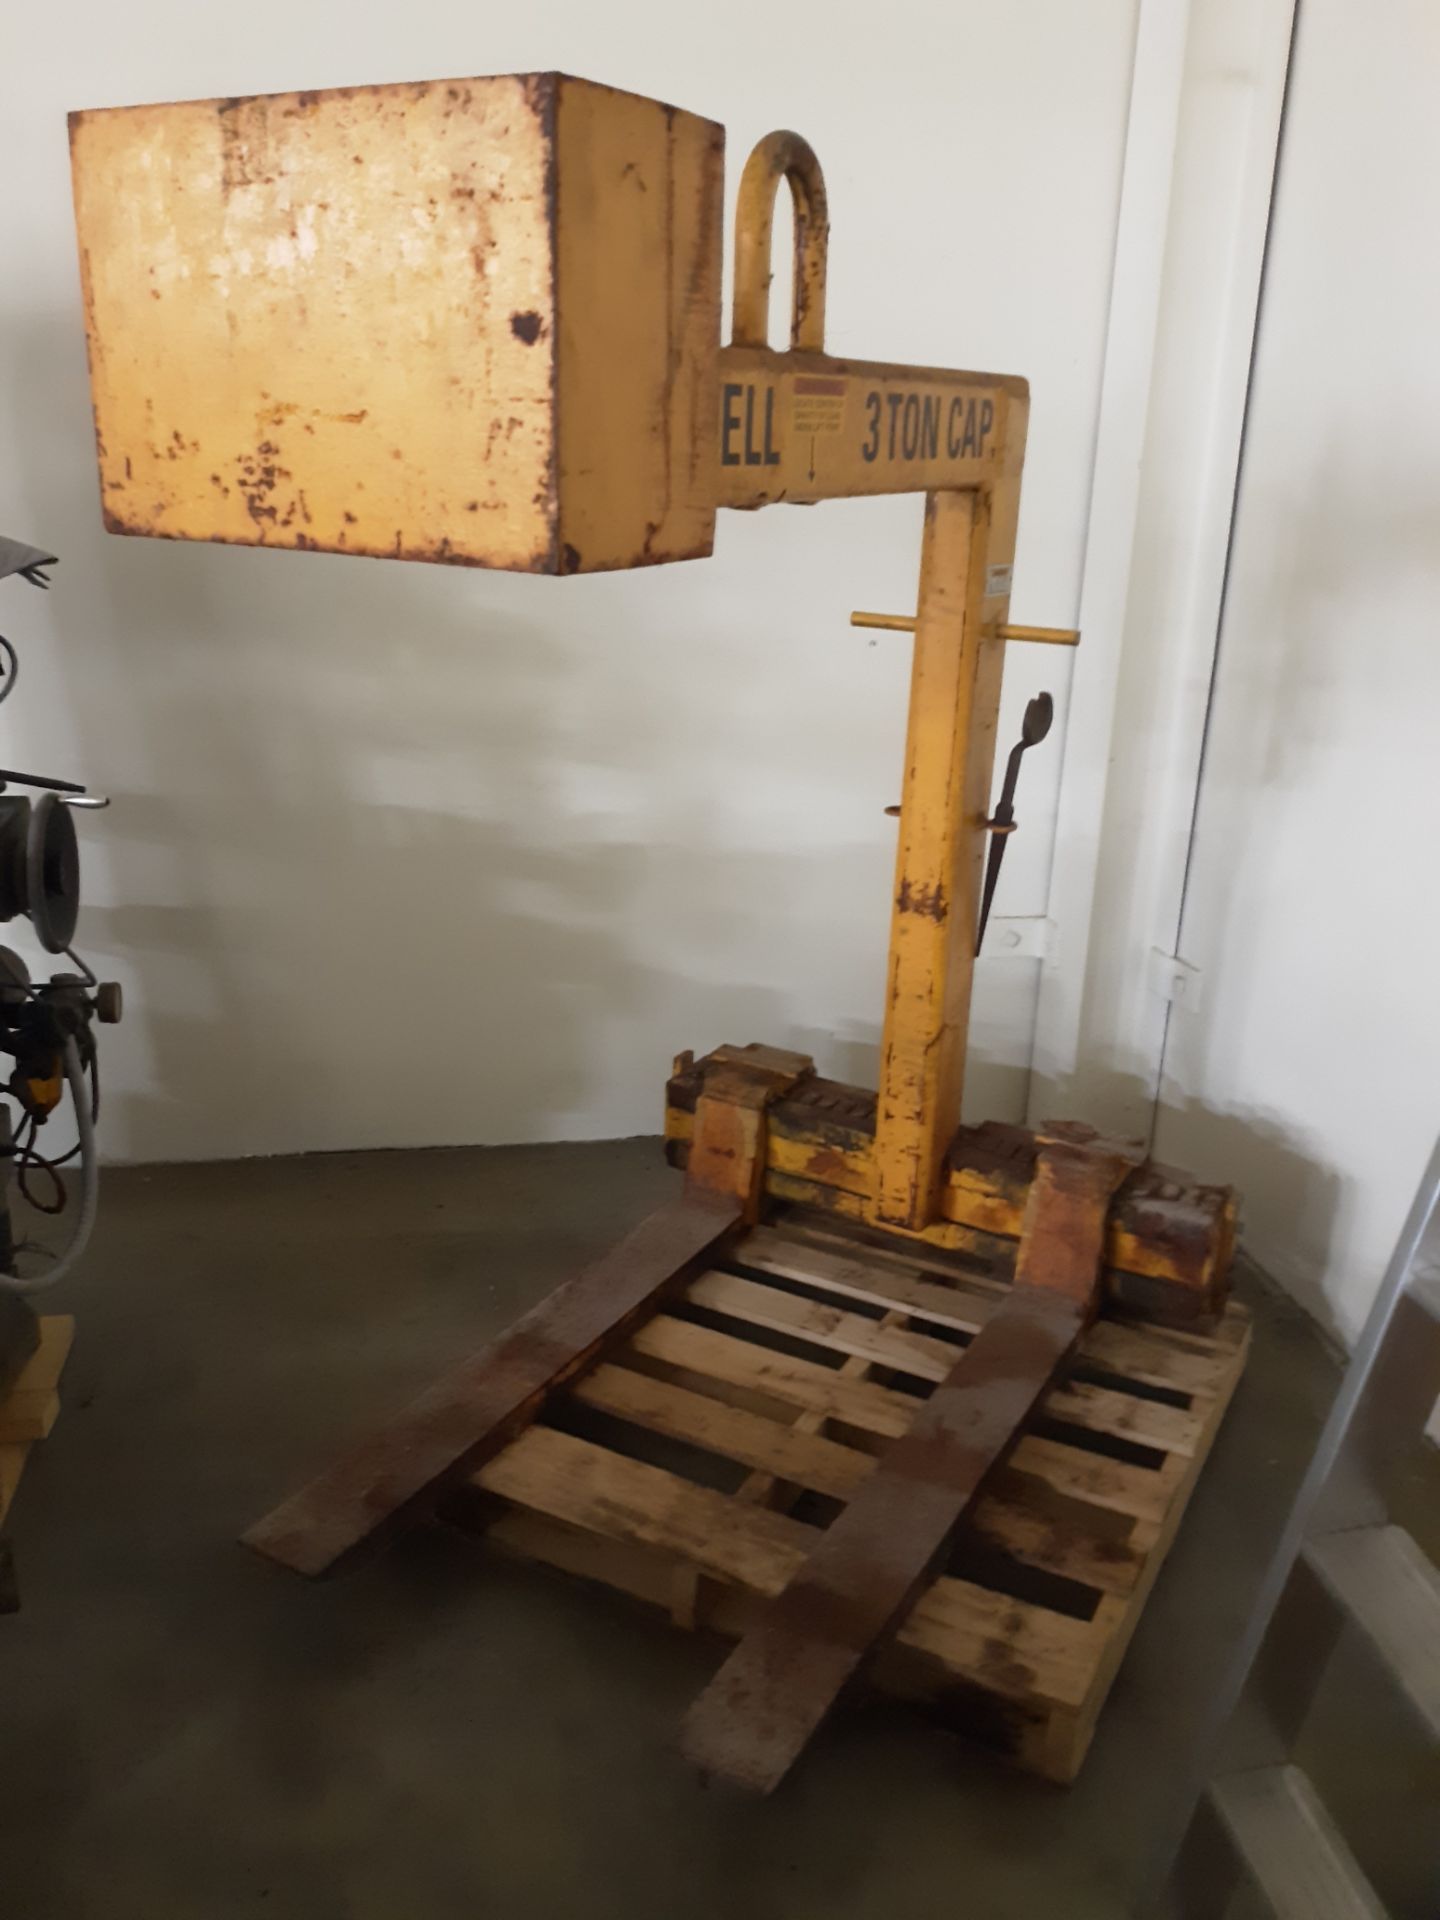 CALDWELL 3-TON RATED FORKLIFT ATTACHMENT MODEL-91-3-4Z S#72045-2 ; RIGGING FEE: $10 - Image 2 of 2